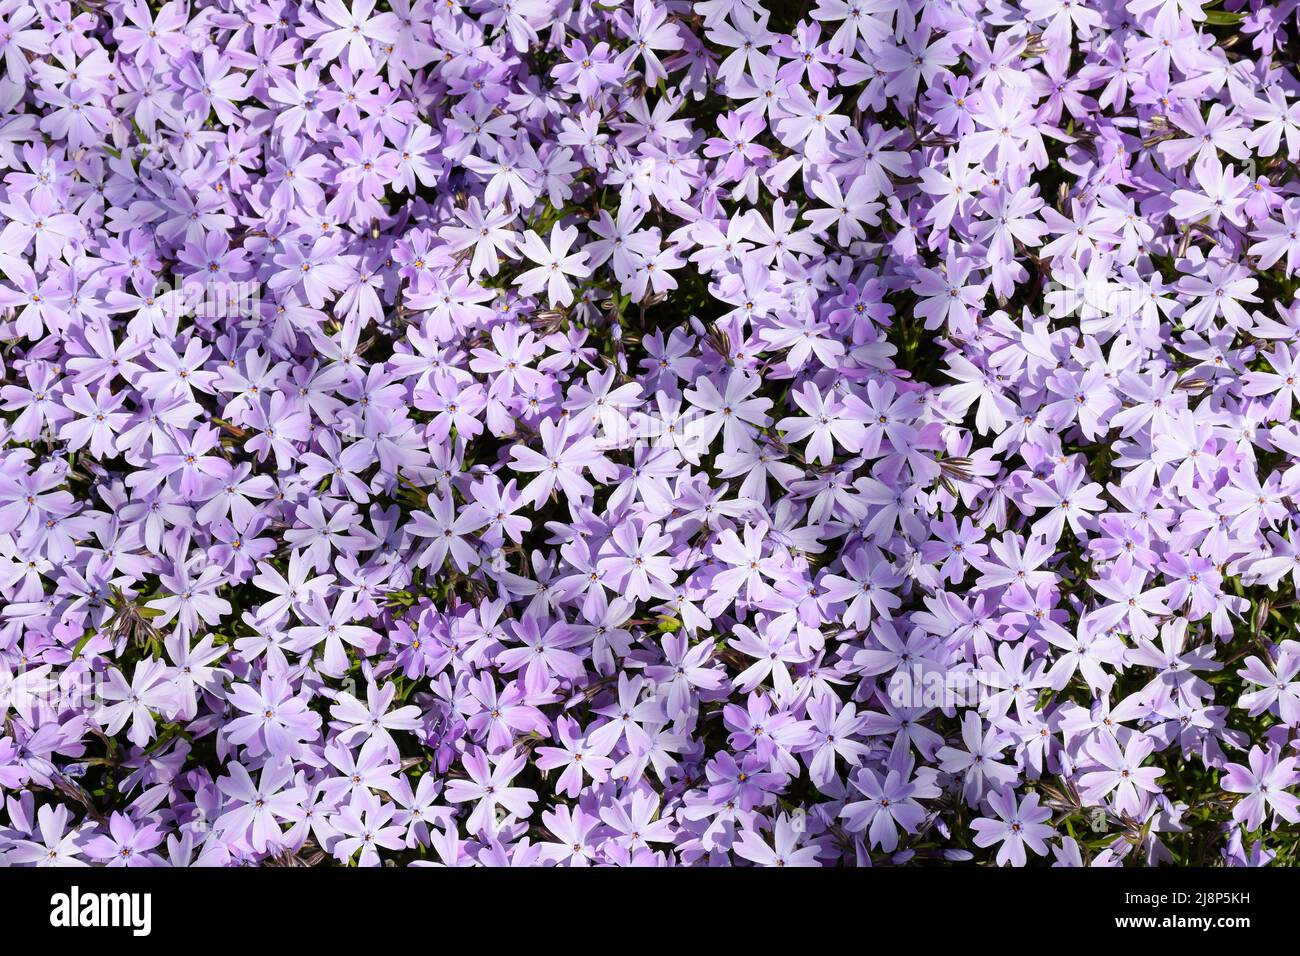 Lots of small purple phlox flowers all over the frame. Leaves are visible between them. Stock Photo